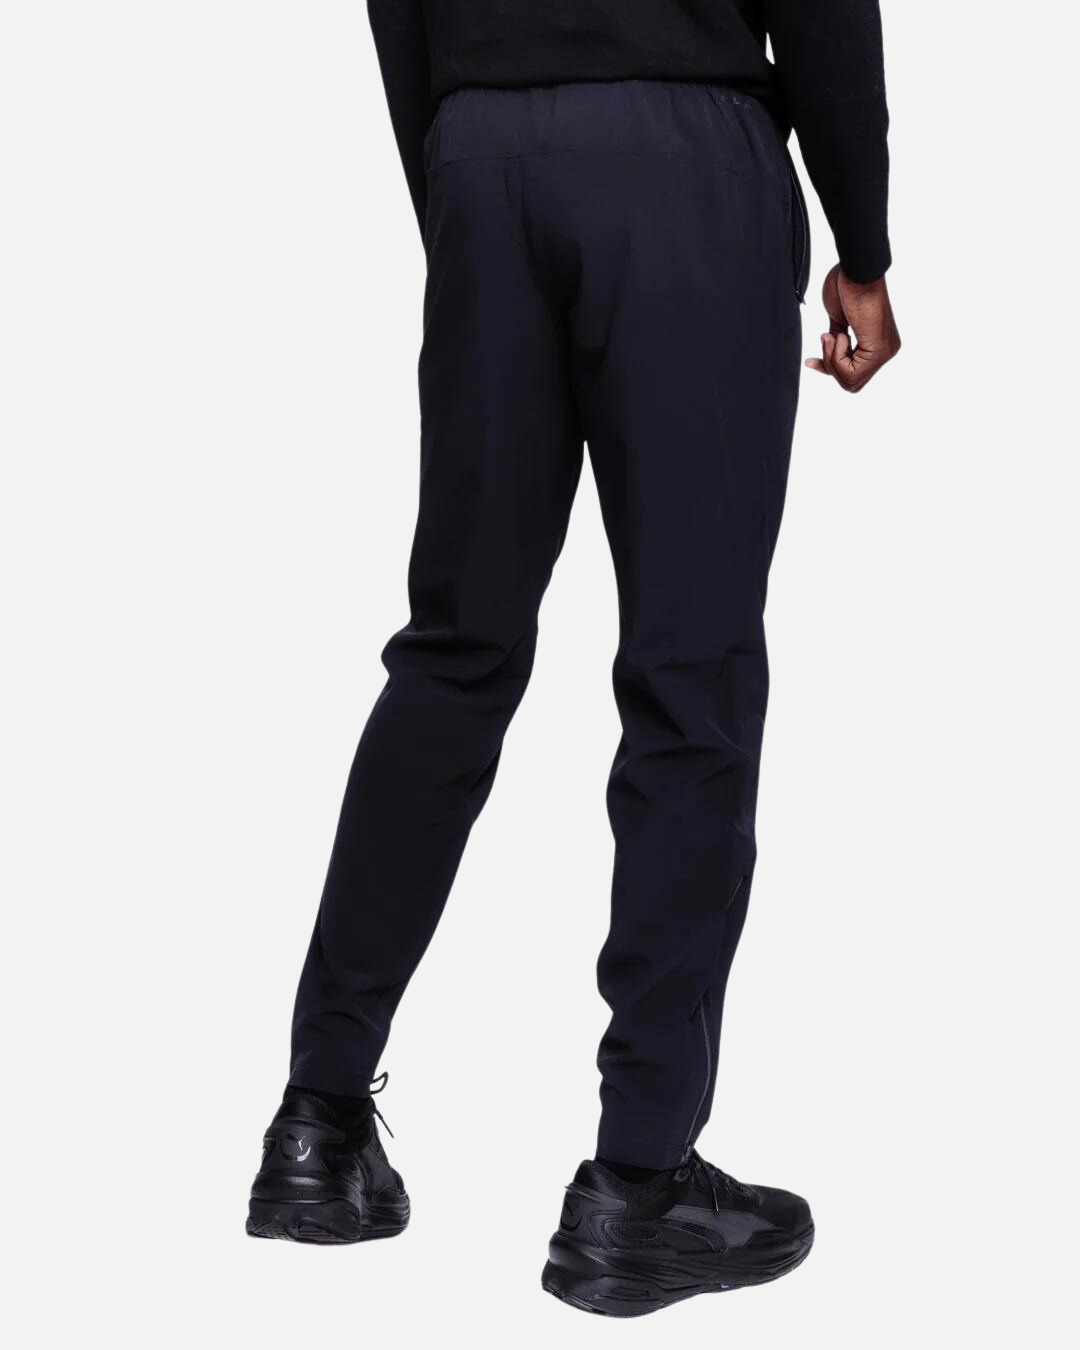 Under Armor OutRun The Storm Pants - Black